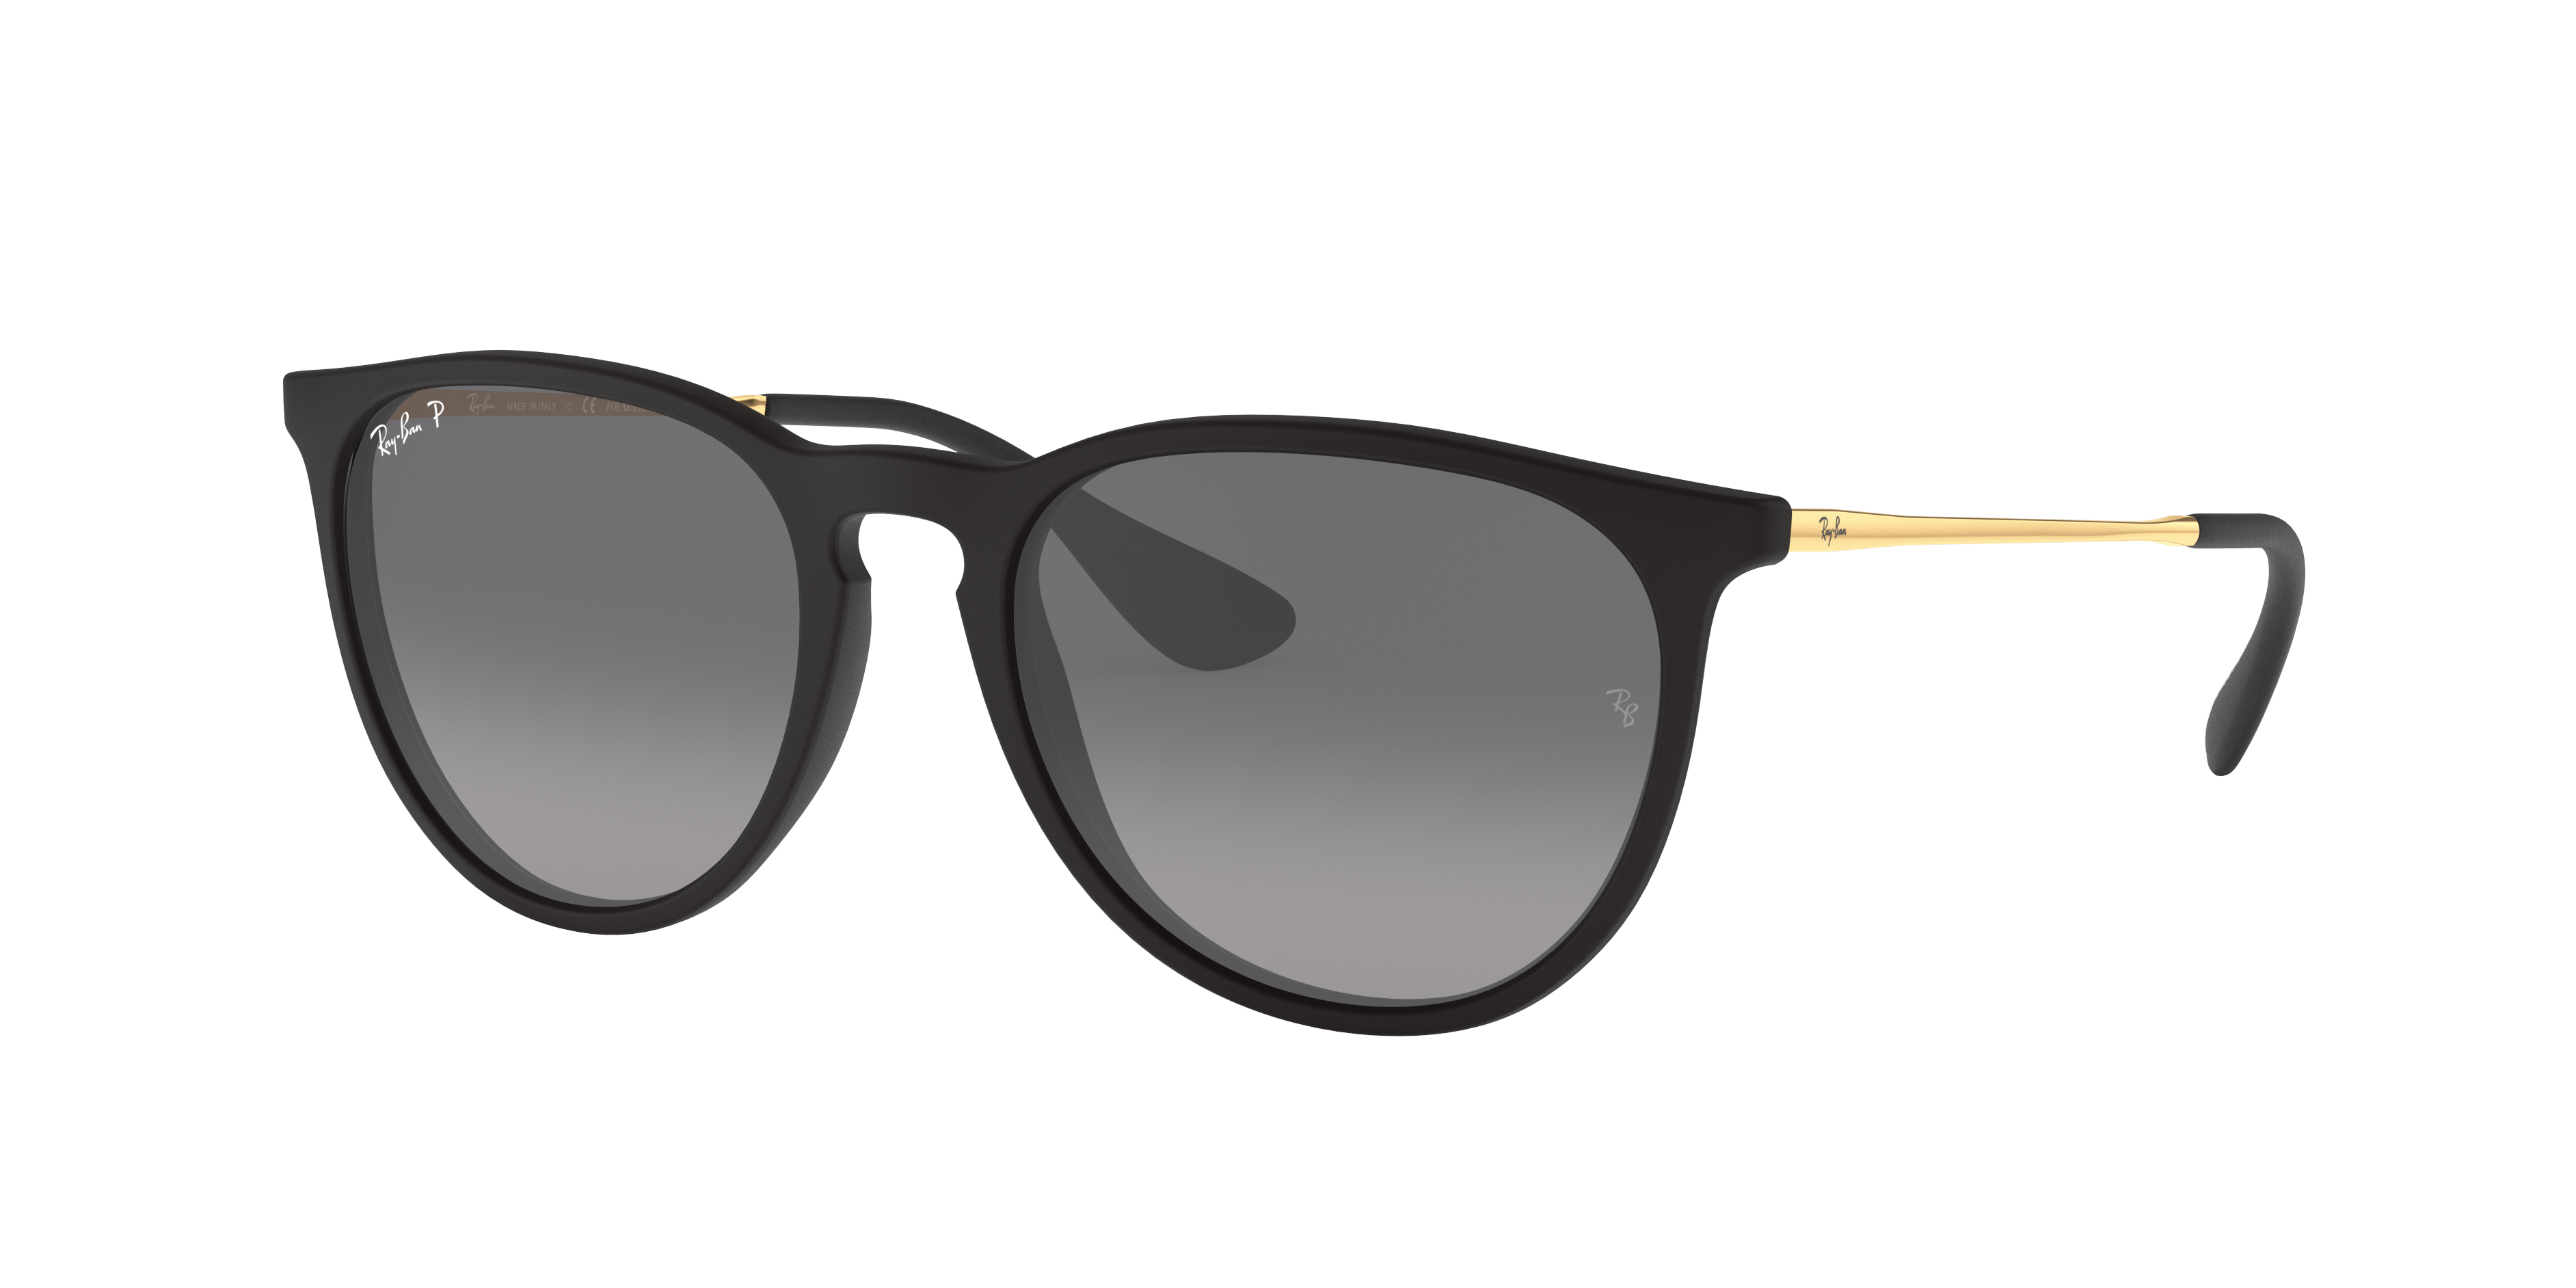 Erika @collection Sunglasses in Black and Black | Ray-Ban®